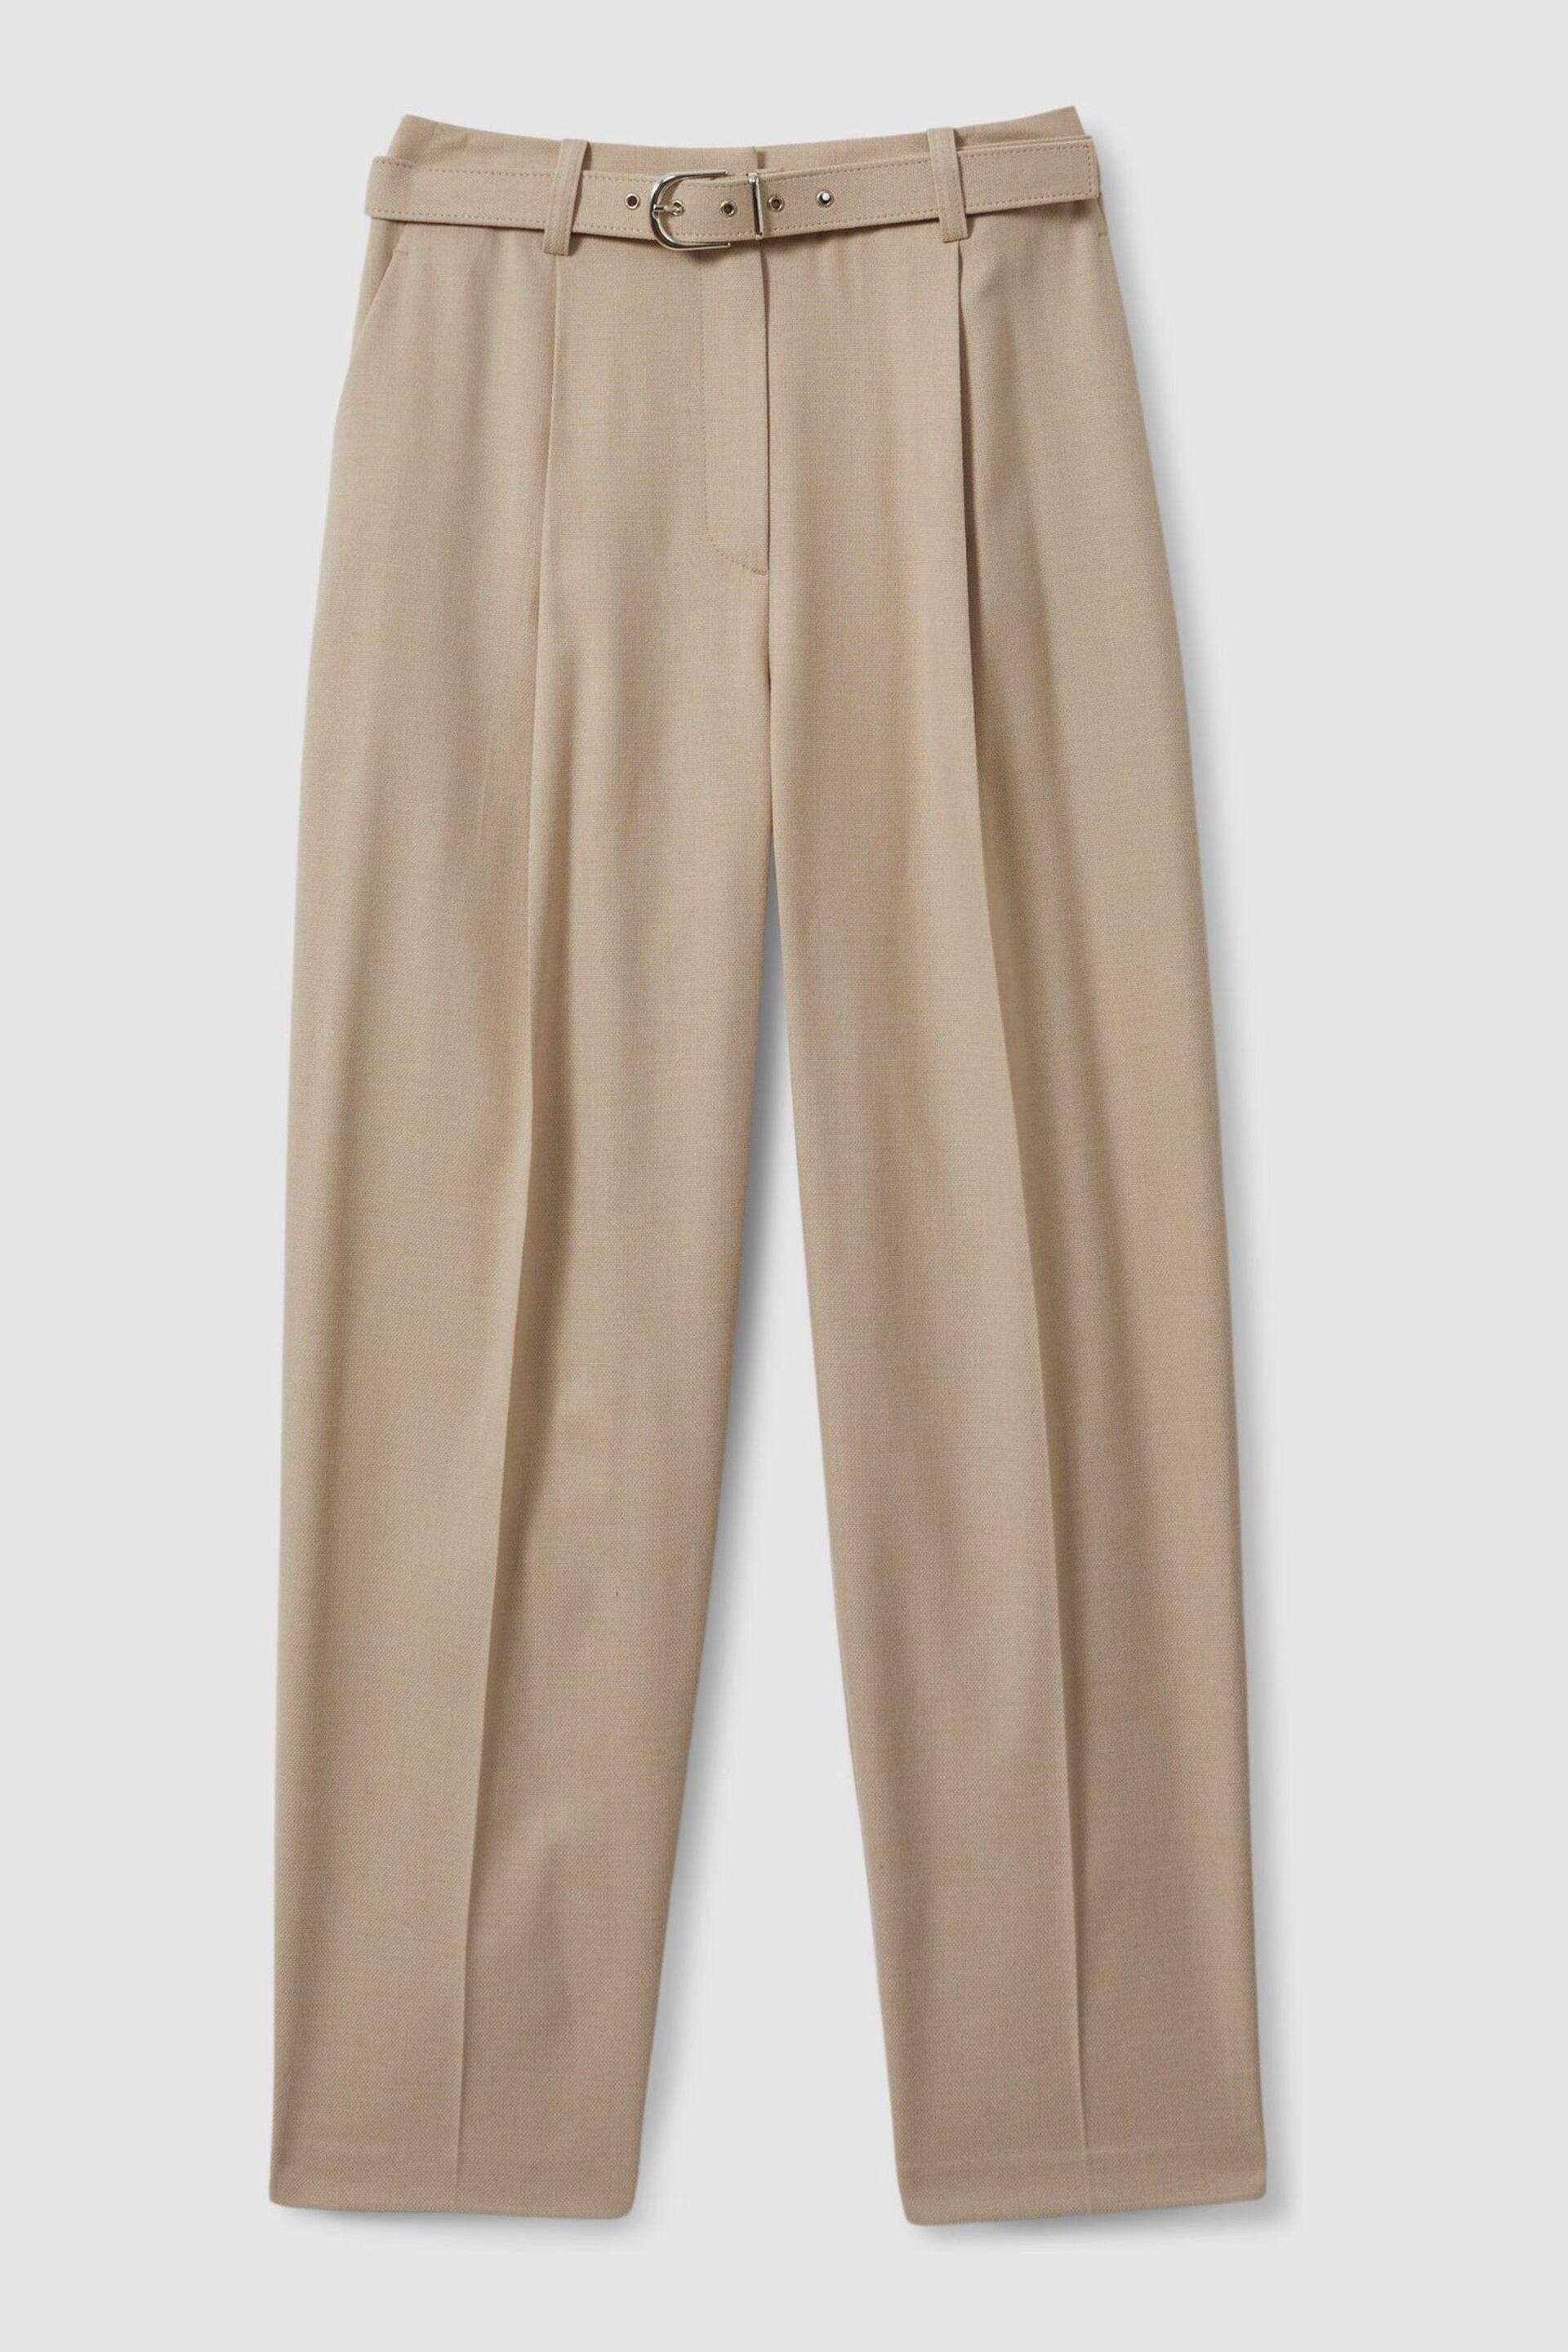 Reiss Neutral Freja Petite Tapered Belted Trousers - Image 2 of 7